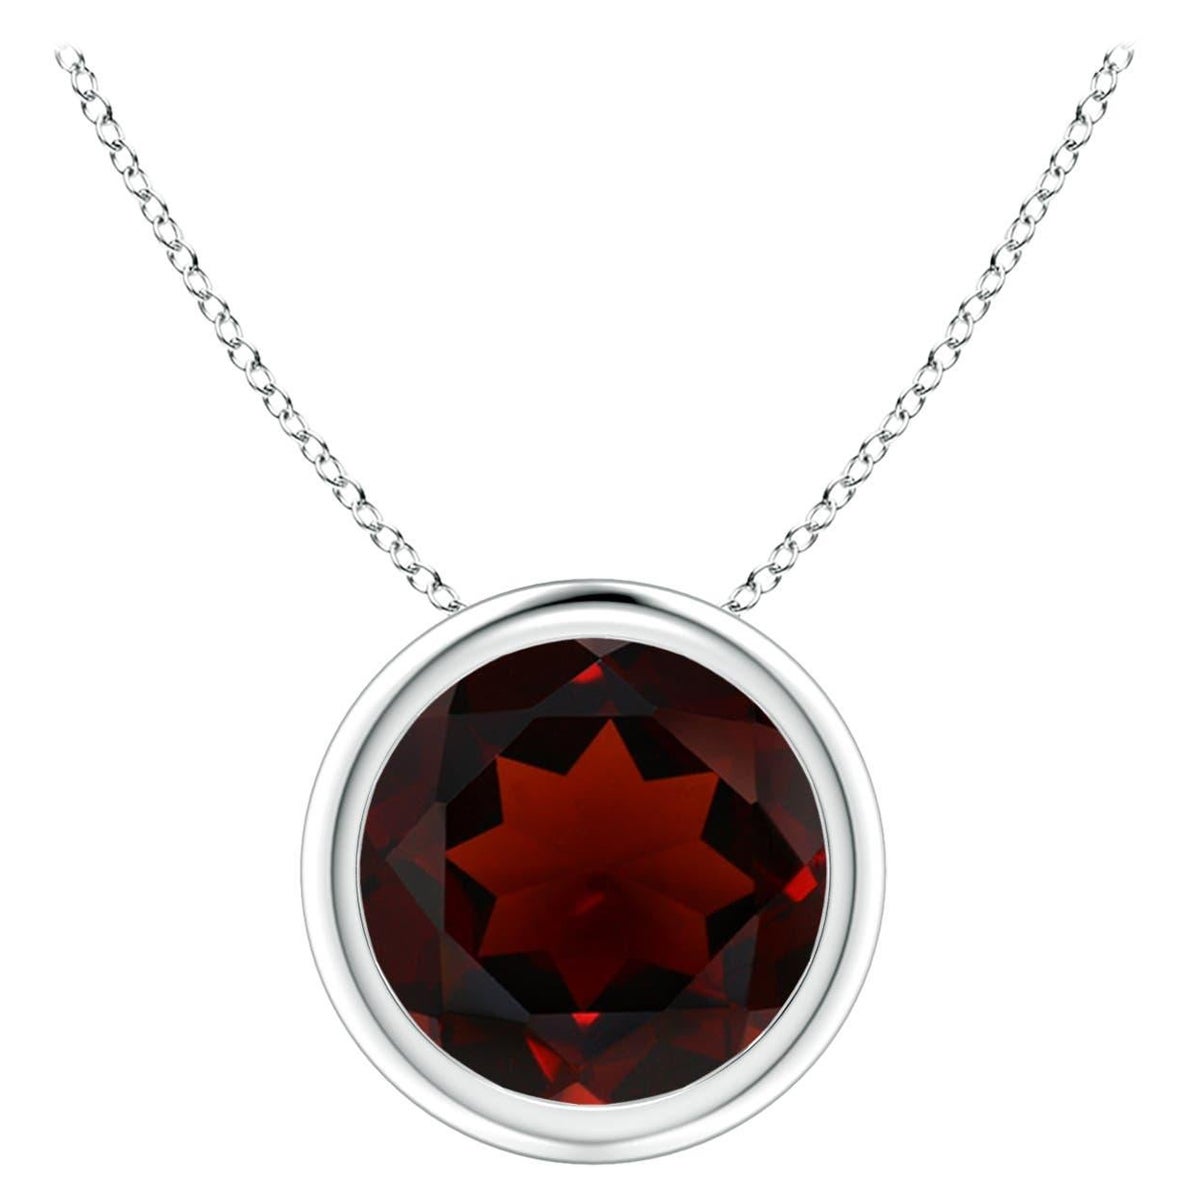 Natural Bezel-Set Round 2.2ct Garnet Solitaire Pendant in 14K White Gold For Sale